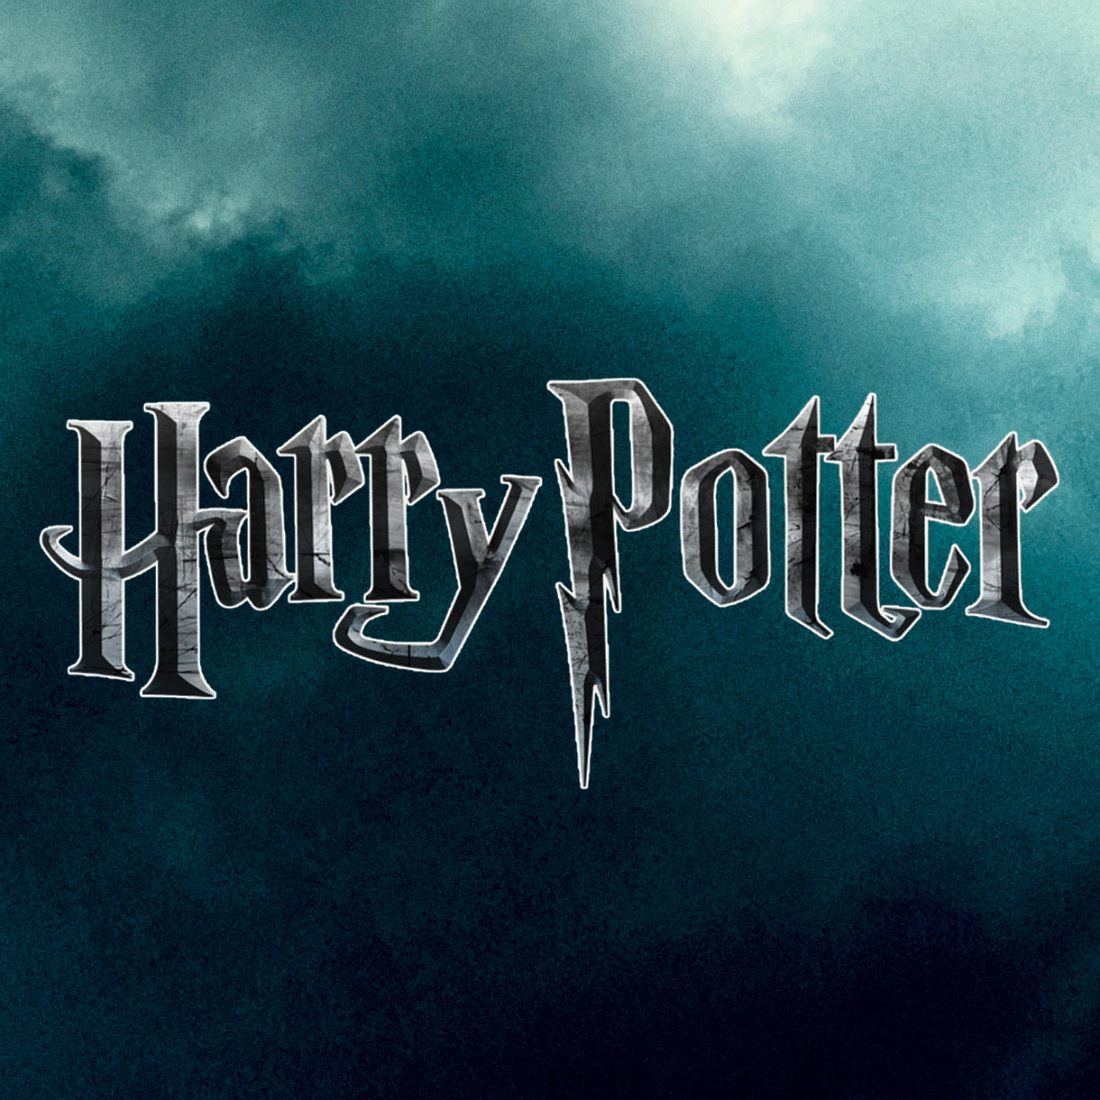 Harry-Potter-Serie in Planung